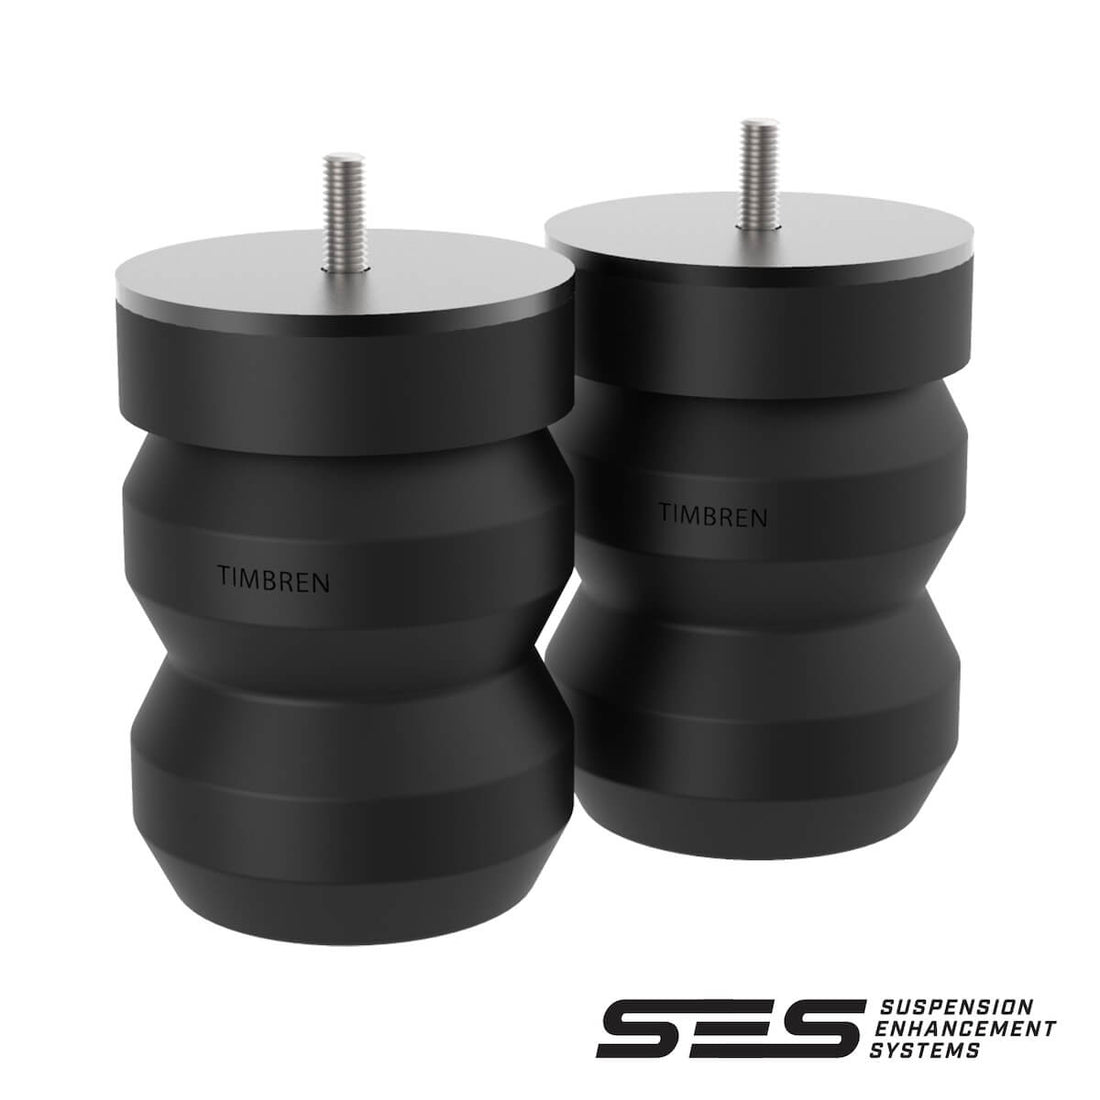 Timbren SES Suspension Enhancement System SKU# GMRS15 - Rear Kit